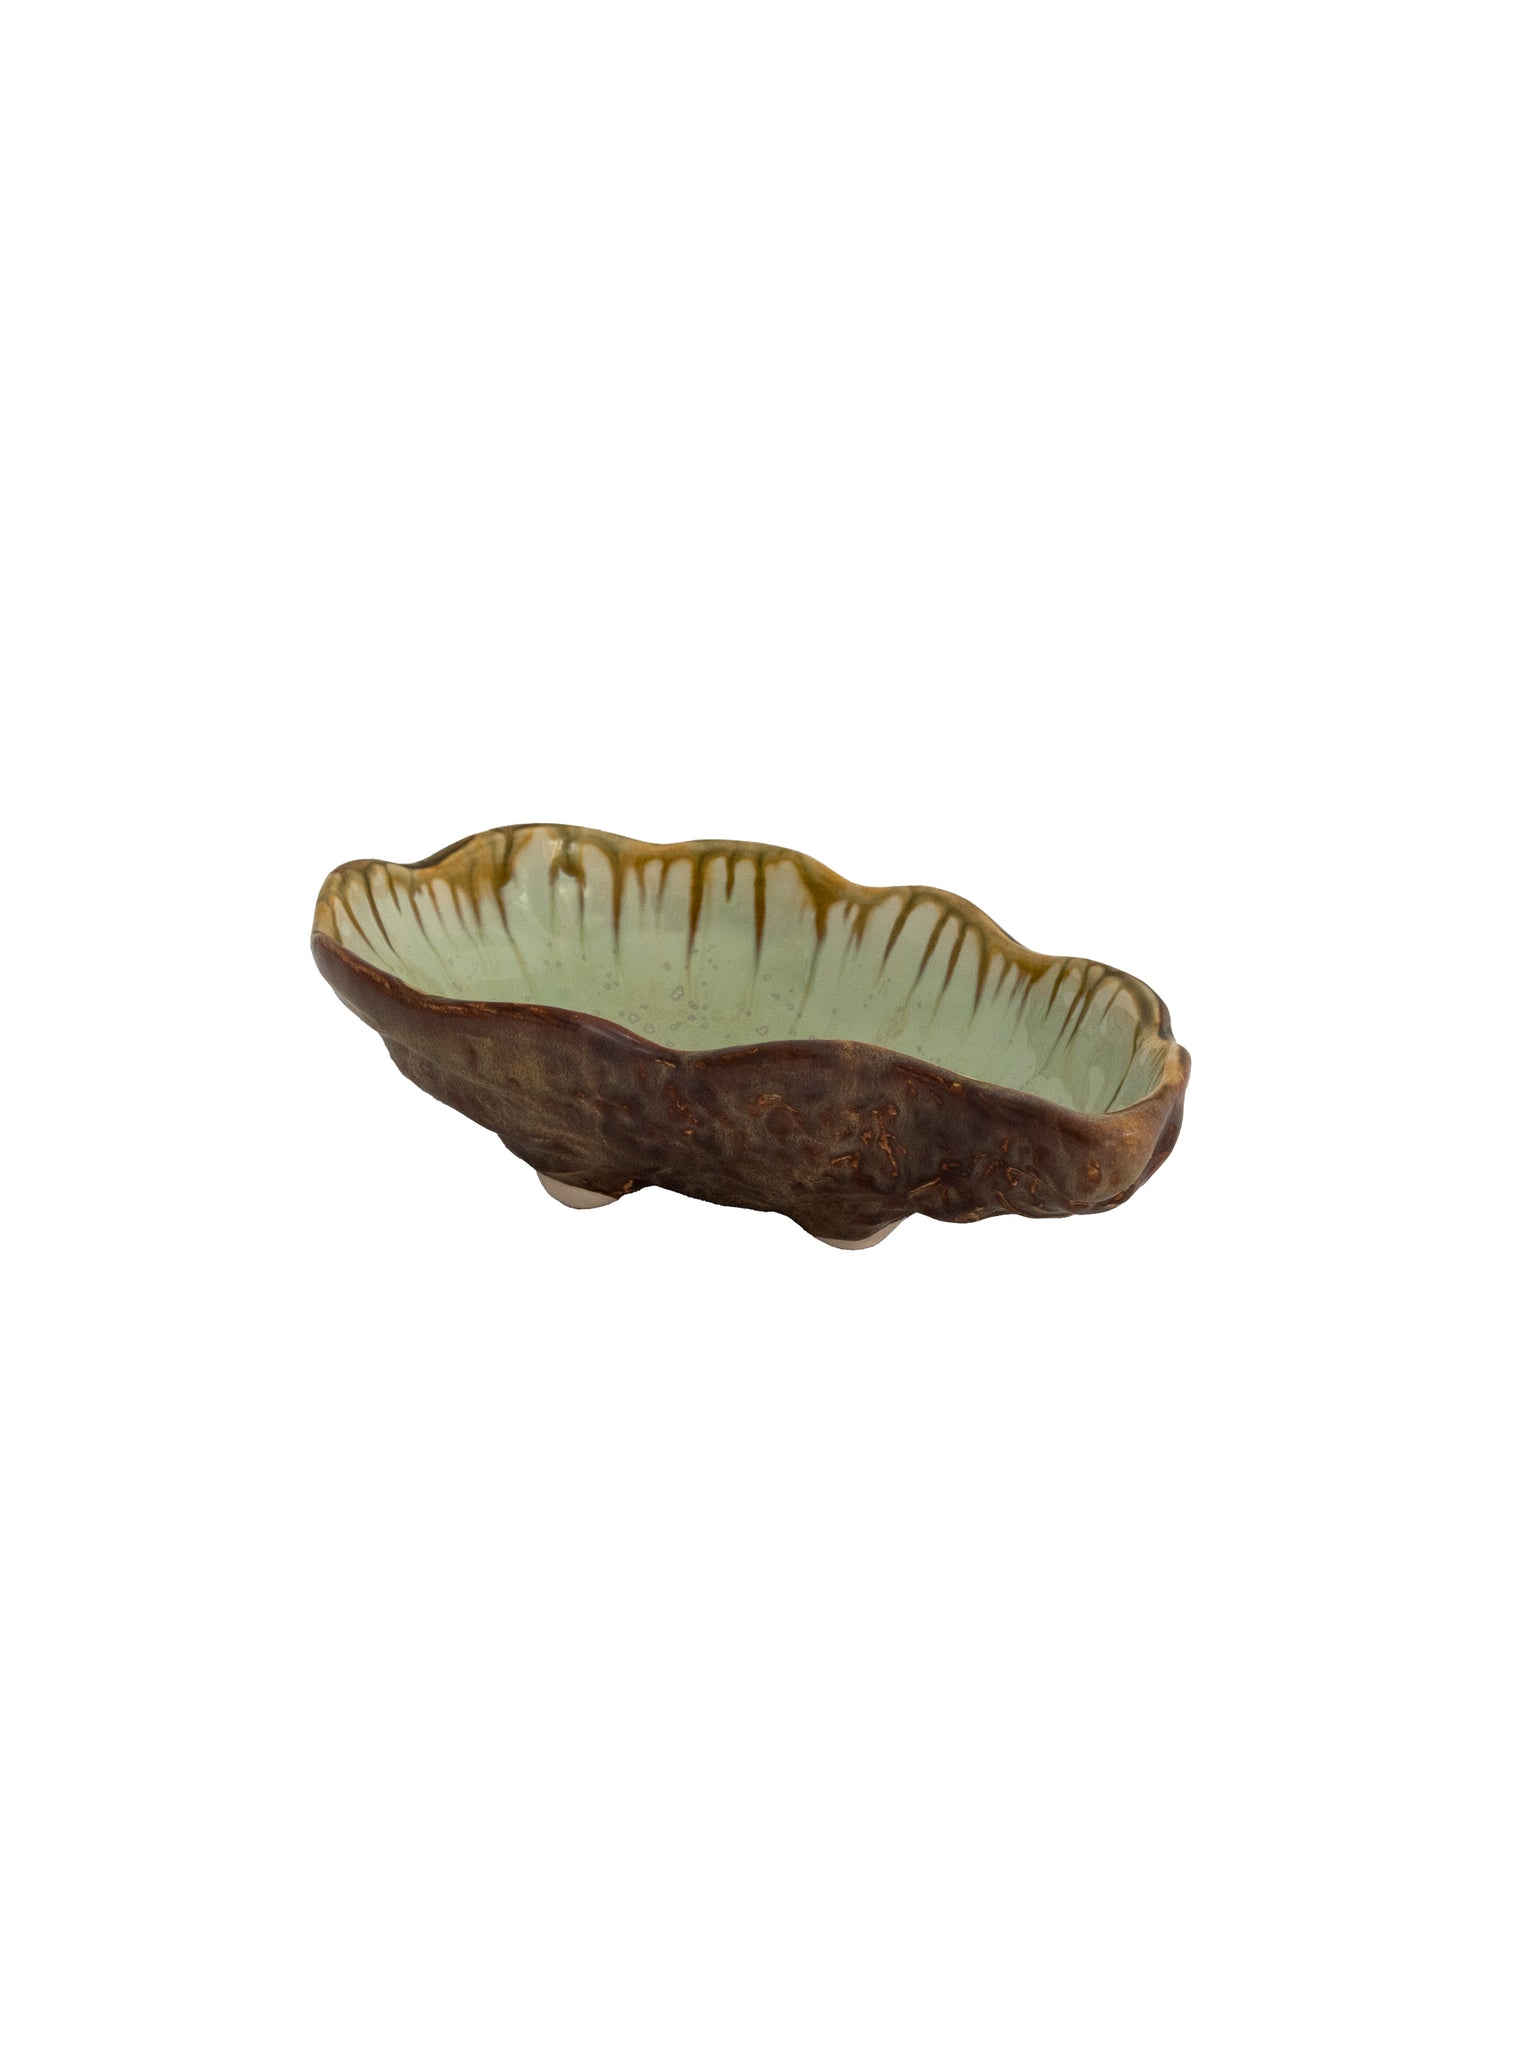 Mint and Tortoise Petite Oyster Bowl Weston Table